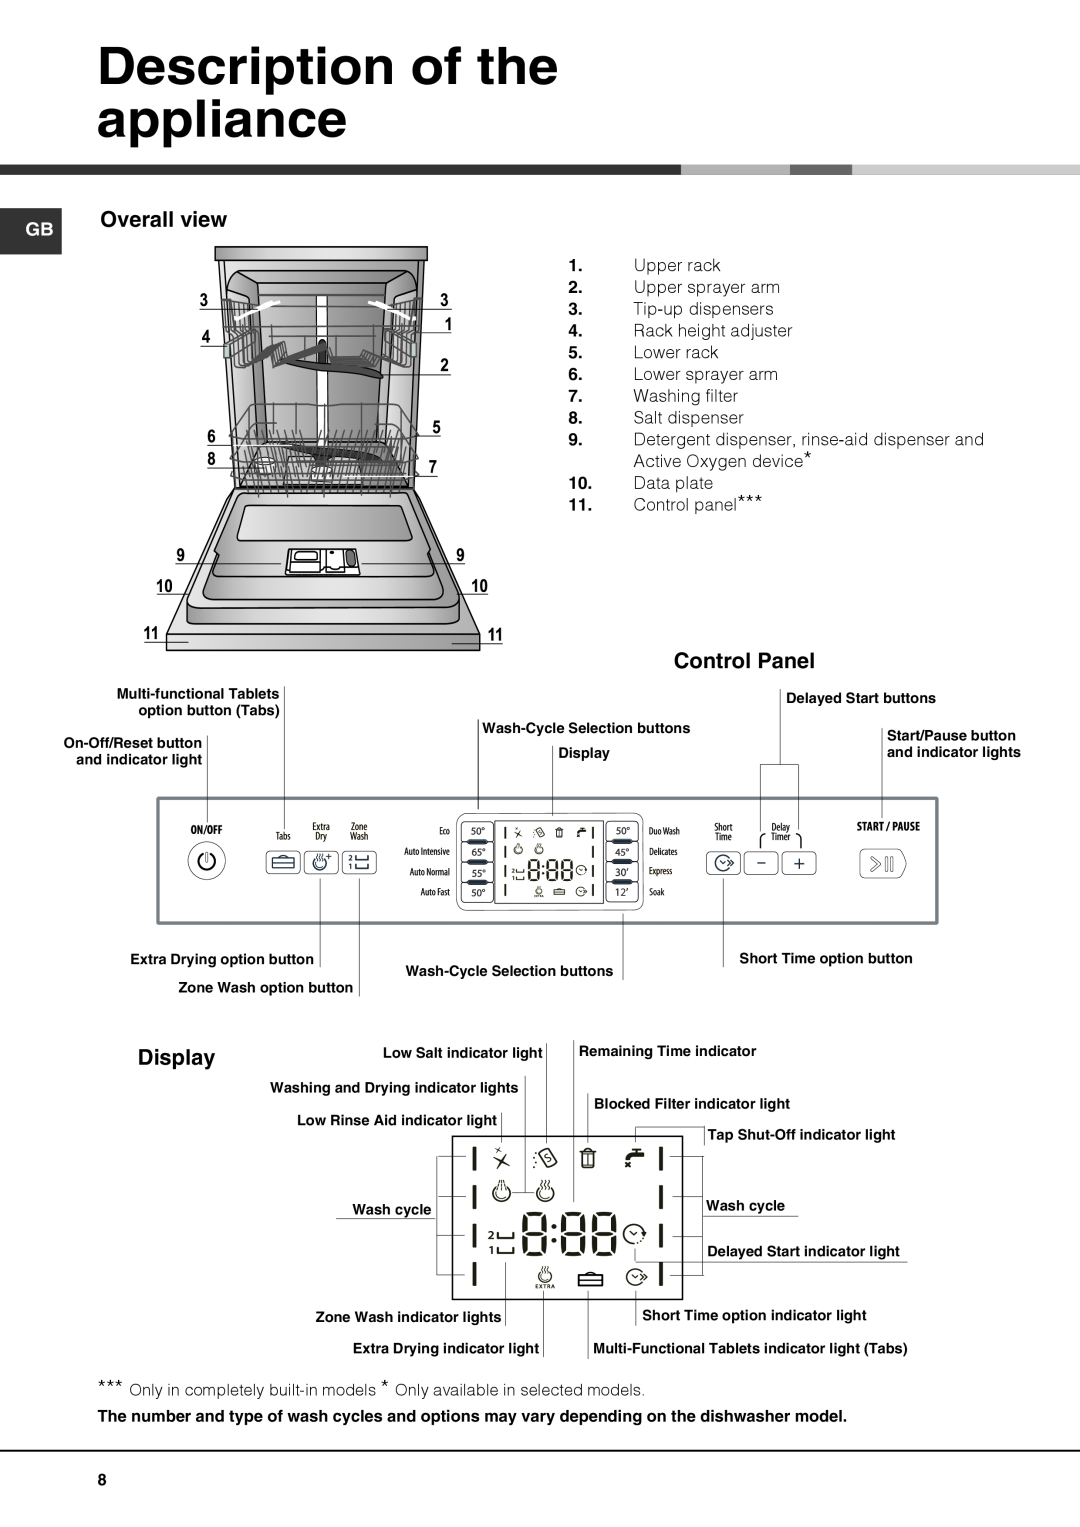 Hotpoint FDFET 33121 manual Description of the appliance, Overall view, Control Panel, Display 